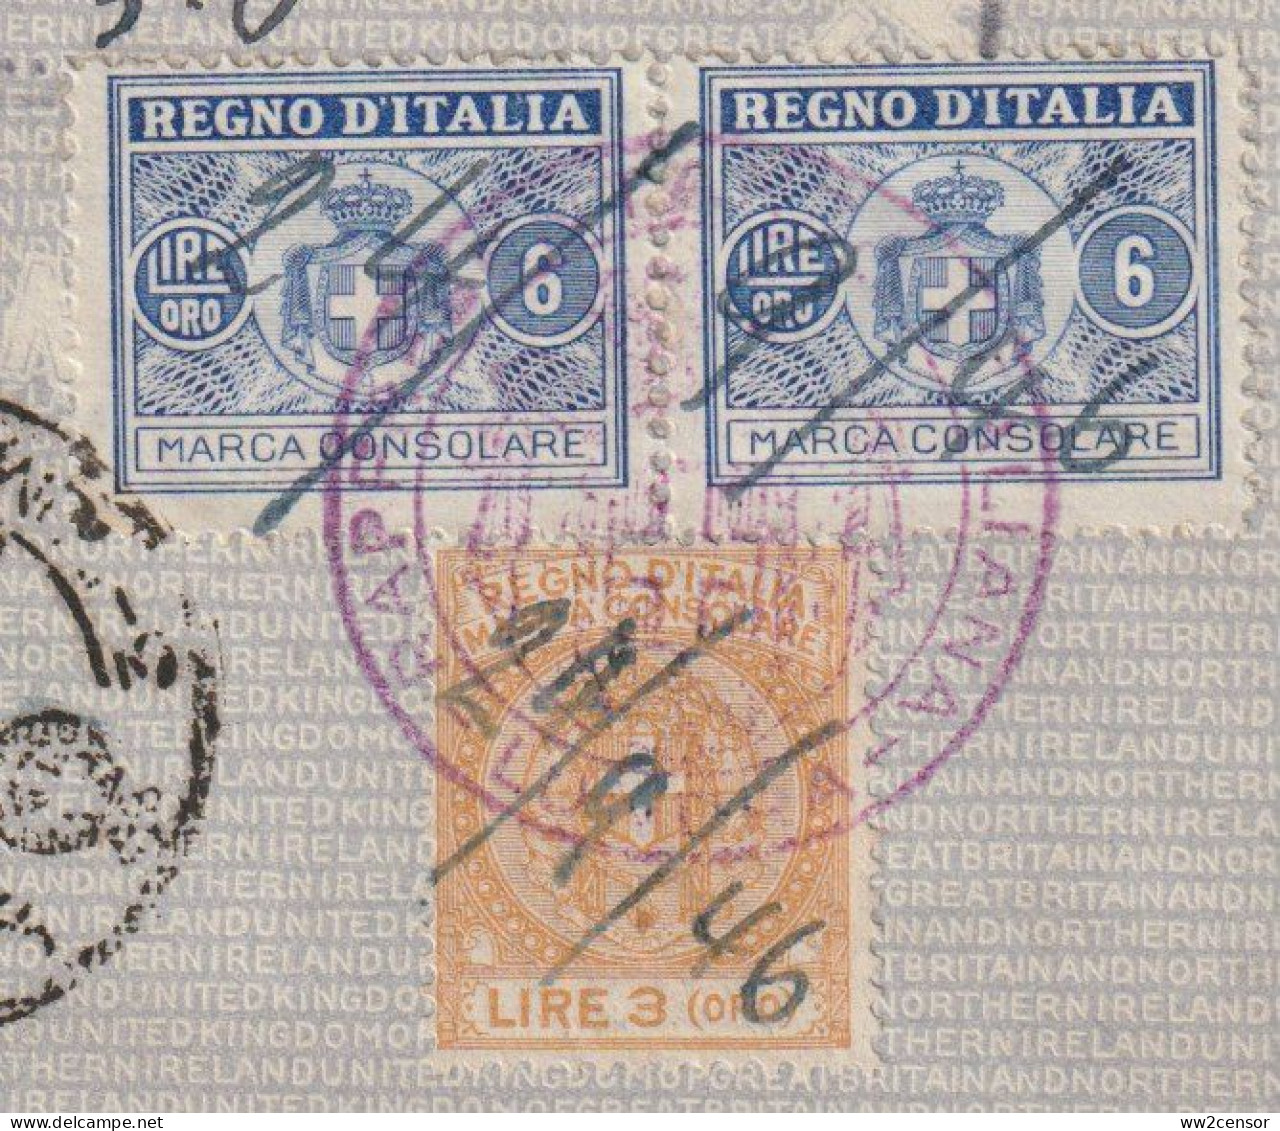 Italy 1946 - Italian Fiscal Revenue Stamps On A Visa On A Passport Page - Steuermarken